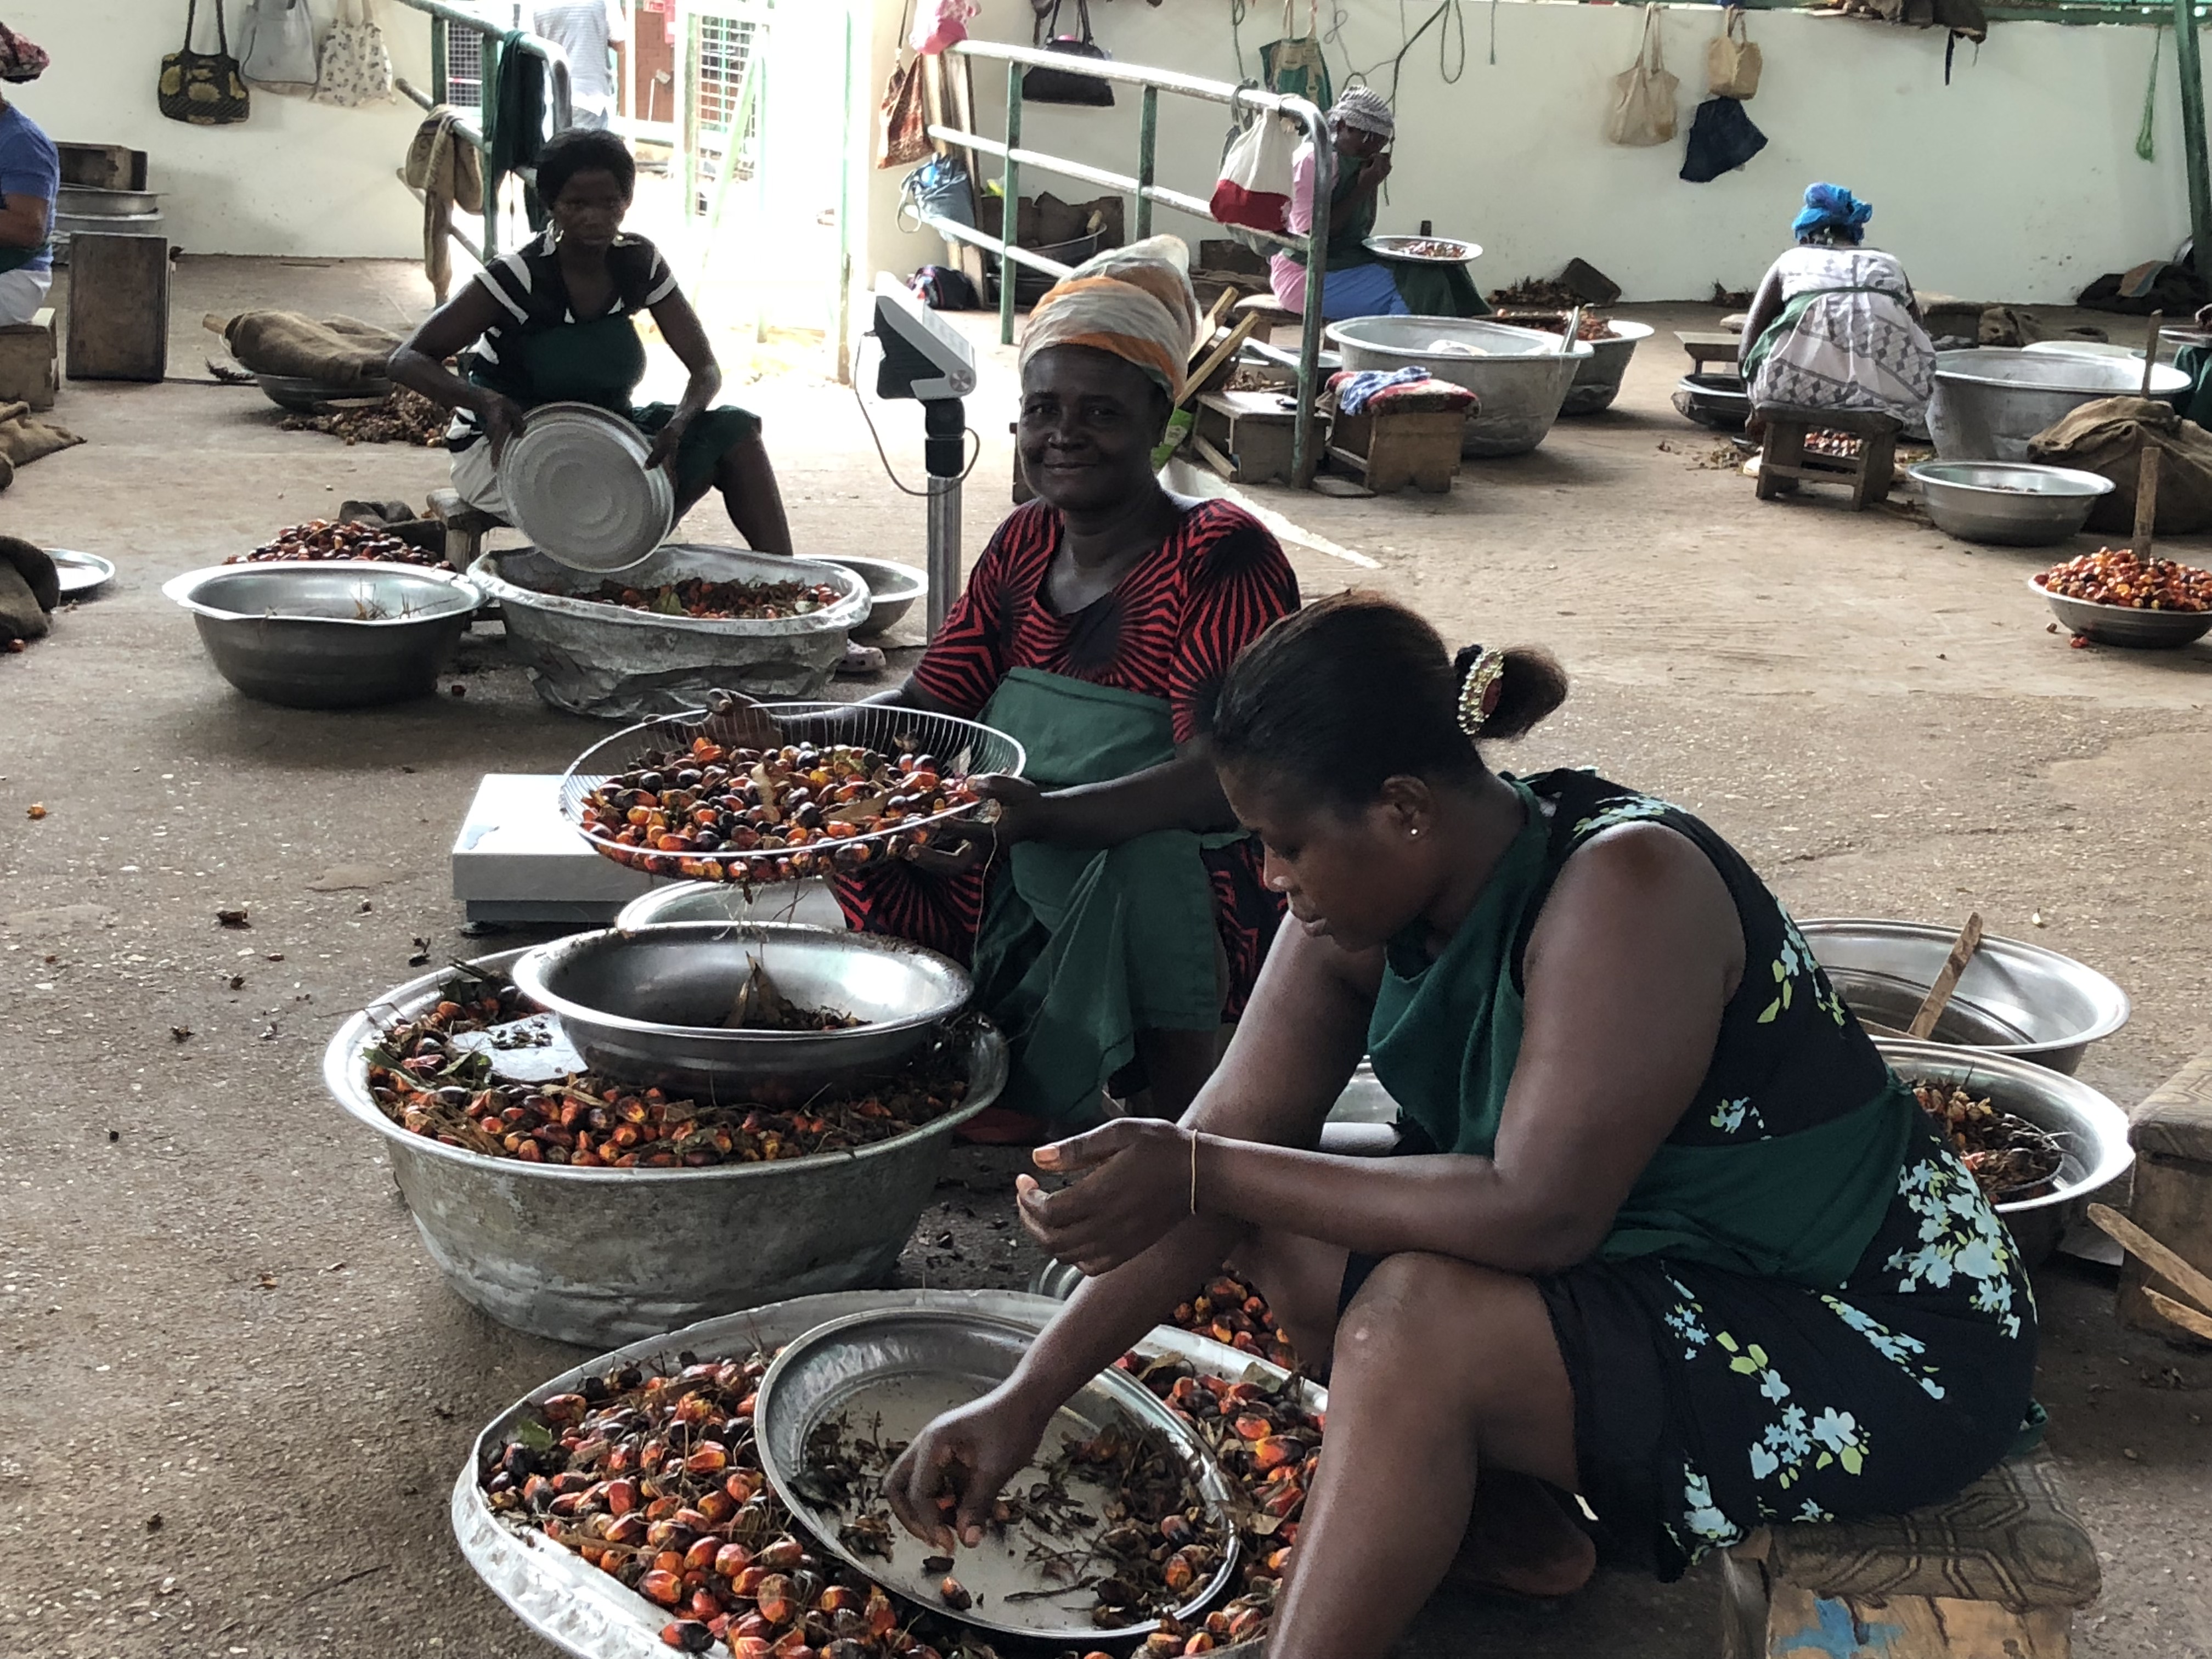 Employees of Serendipalm sort palm kernels.